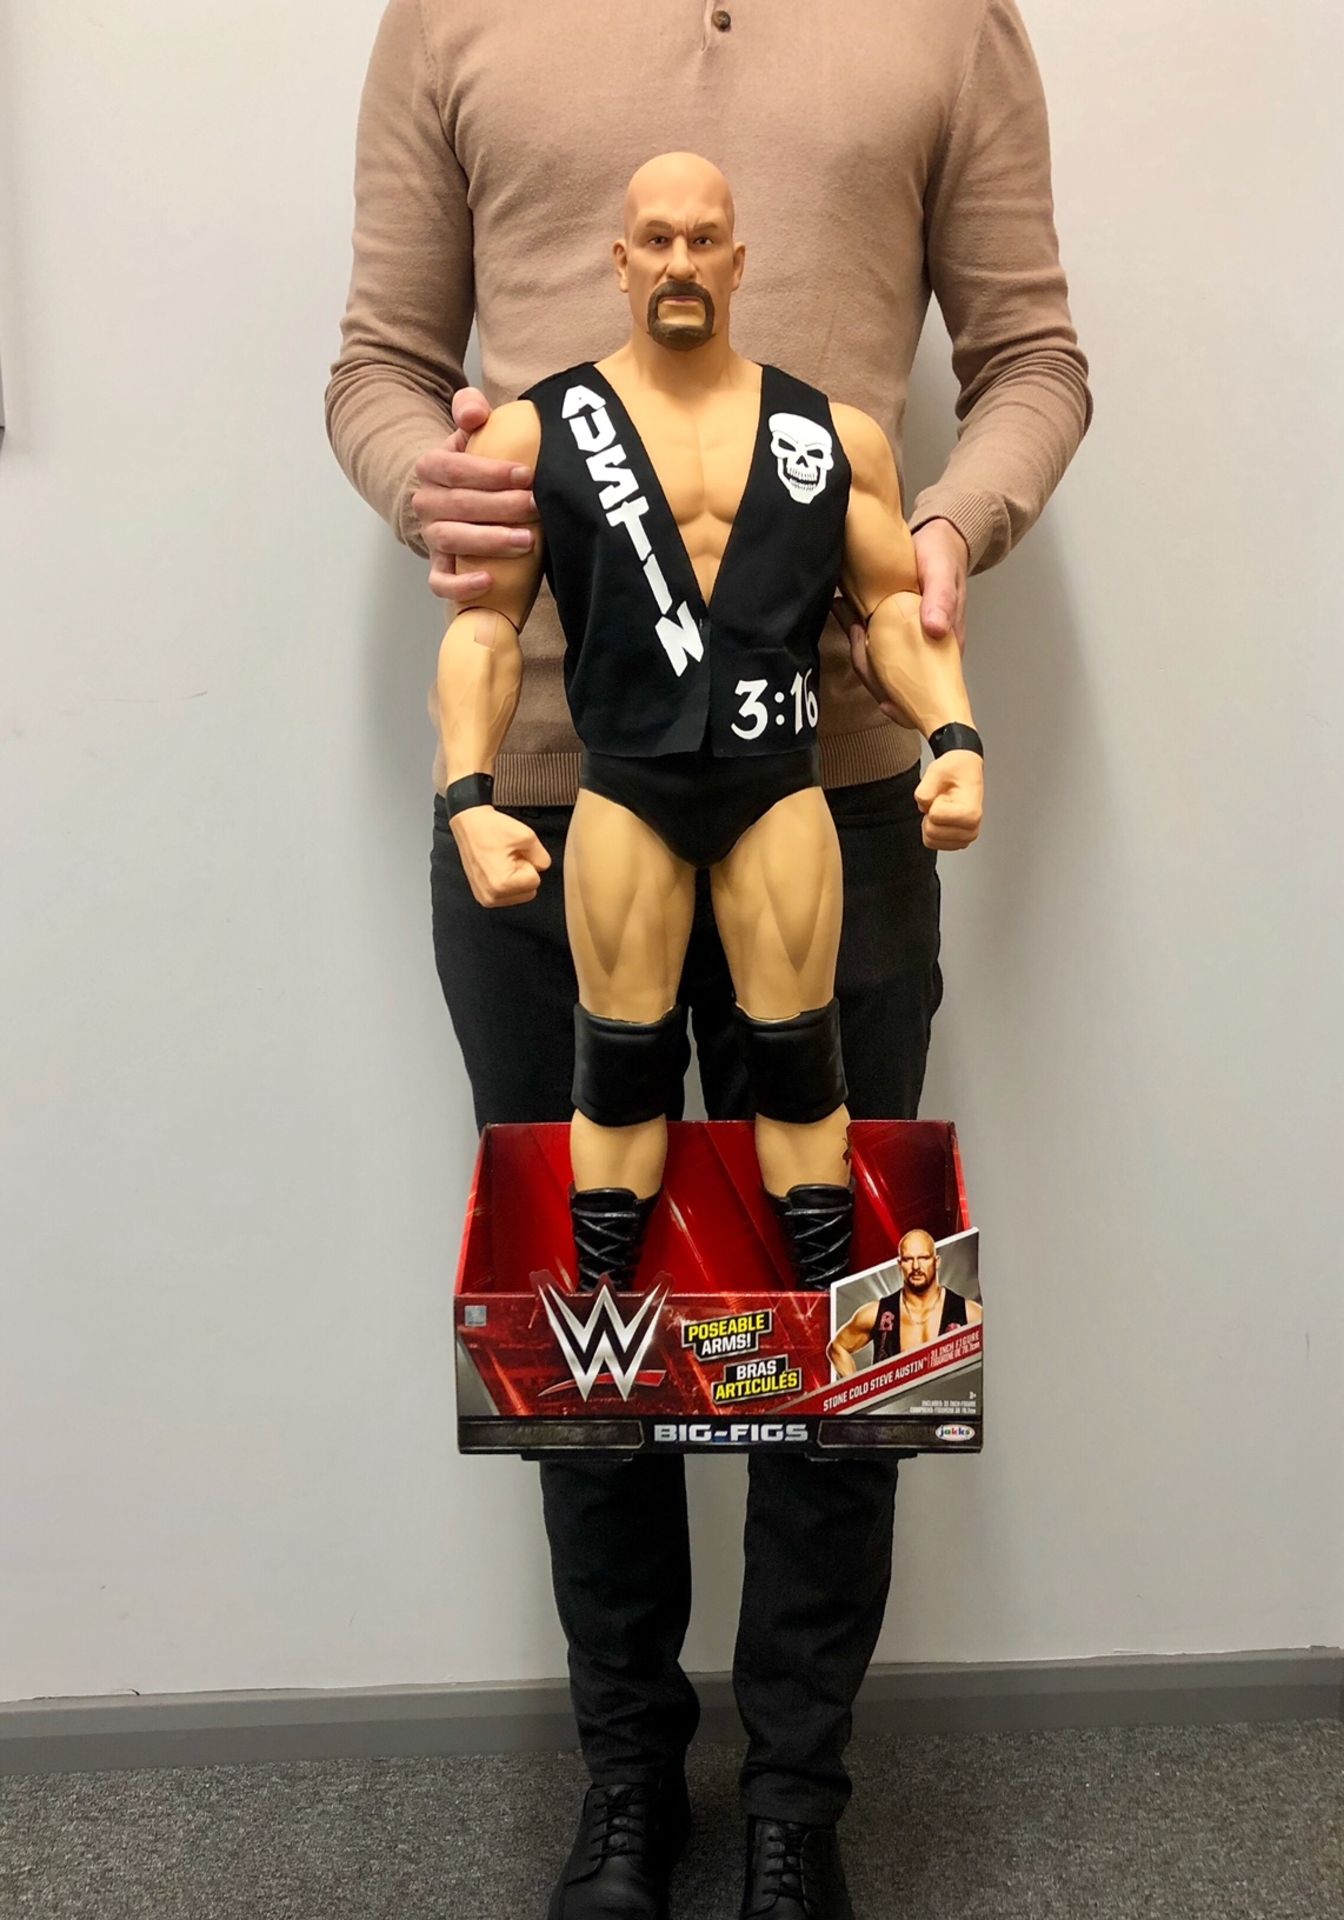 V Brand New Massive 31" WWE Stone Cold Steve Austin Action Figures - 3count.co.uk Price £28.99 - 8 - Image 2 of 8